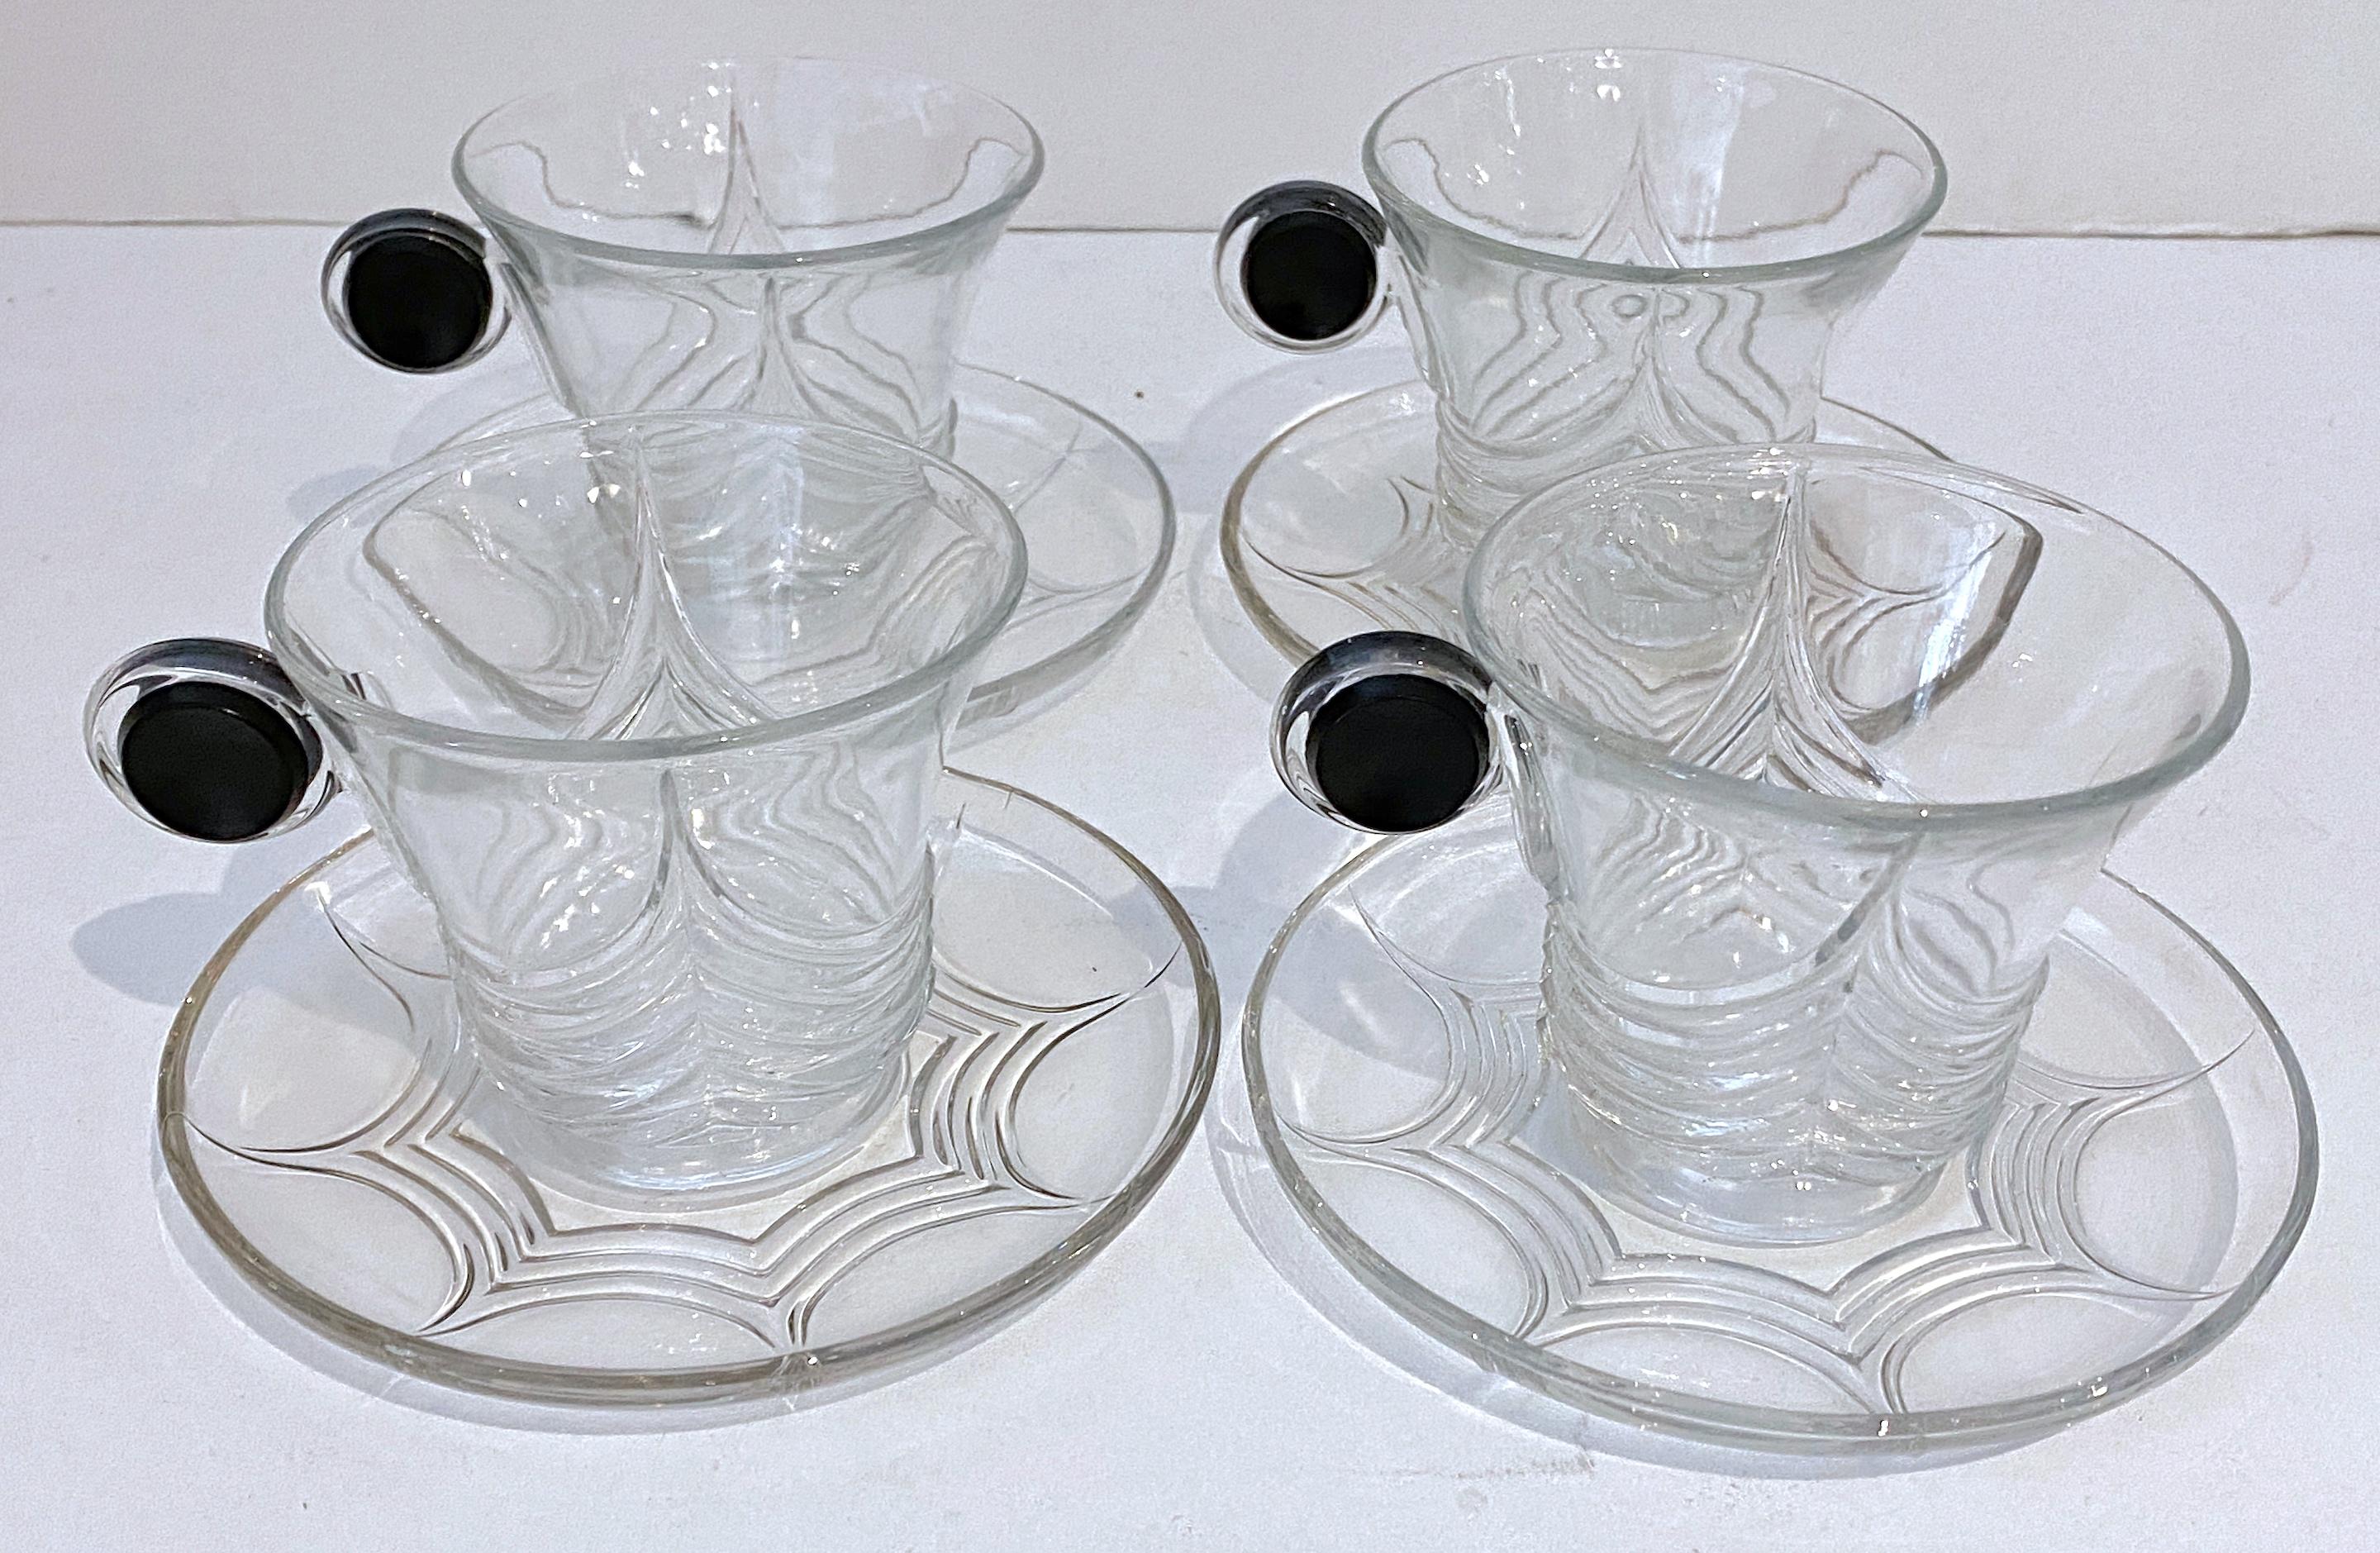 4 Art Deco Heisey Glass 'Stanhope' Cups & Saucers, by Walter Von Hessen
A.H. Heisey Company was formed in Newark, Ohio, in 1895, closed in 1957
Pattern - Stanhope by Heisey
Discontinued 1936 - 1937

This set of four Art Deco Heisey Glass 'Stanhope'